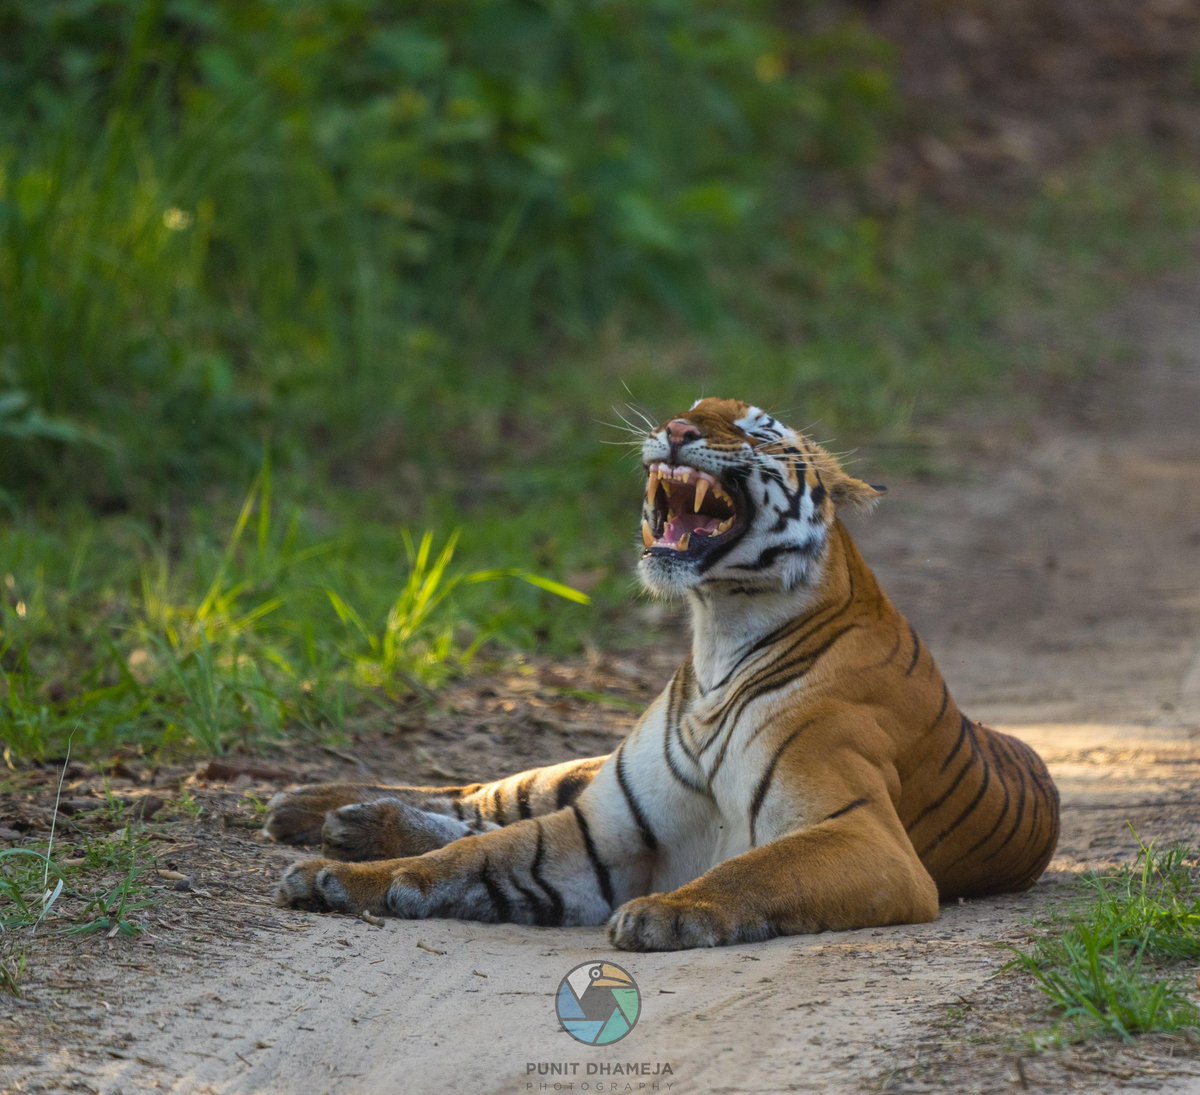 The tiger has fairly stout teeth its somewhat curved canines are the longest among living felids with a crown height of up to 3.5 inches.
#pilibhittigerreserve 
#ThePhotoHour 
#BBCWildlifePOTD 
#wildlifephotography 
#NatureBeauty 
#natgeoindia 
#IndiAves